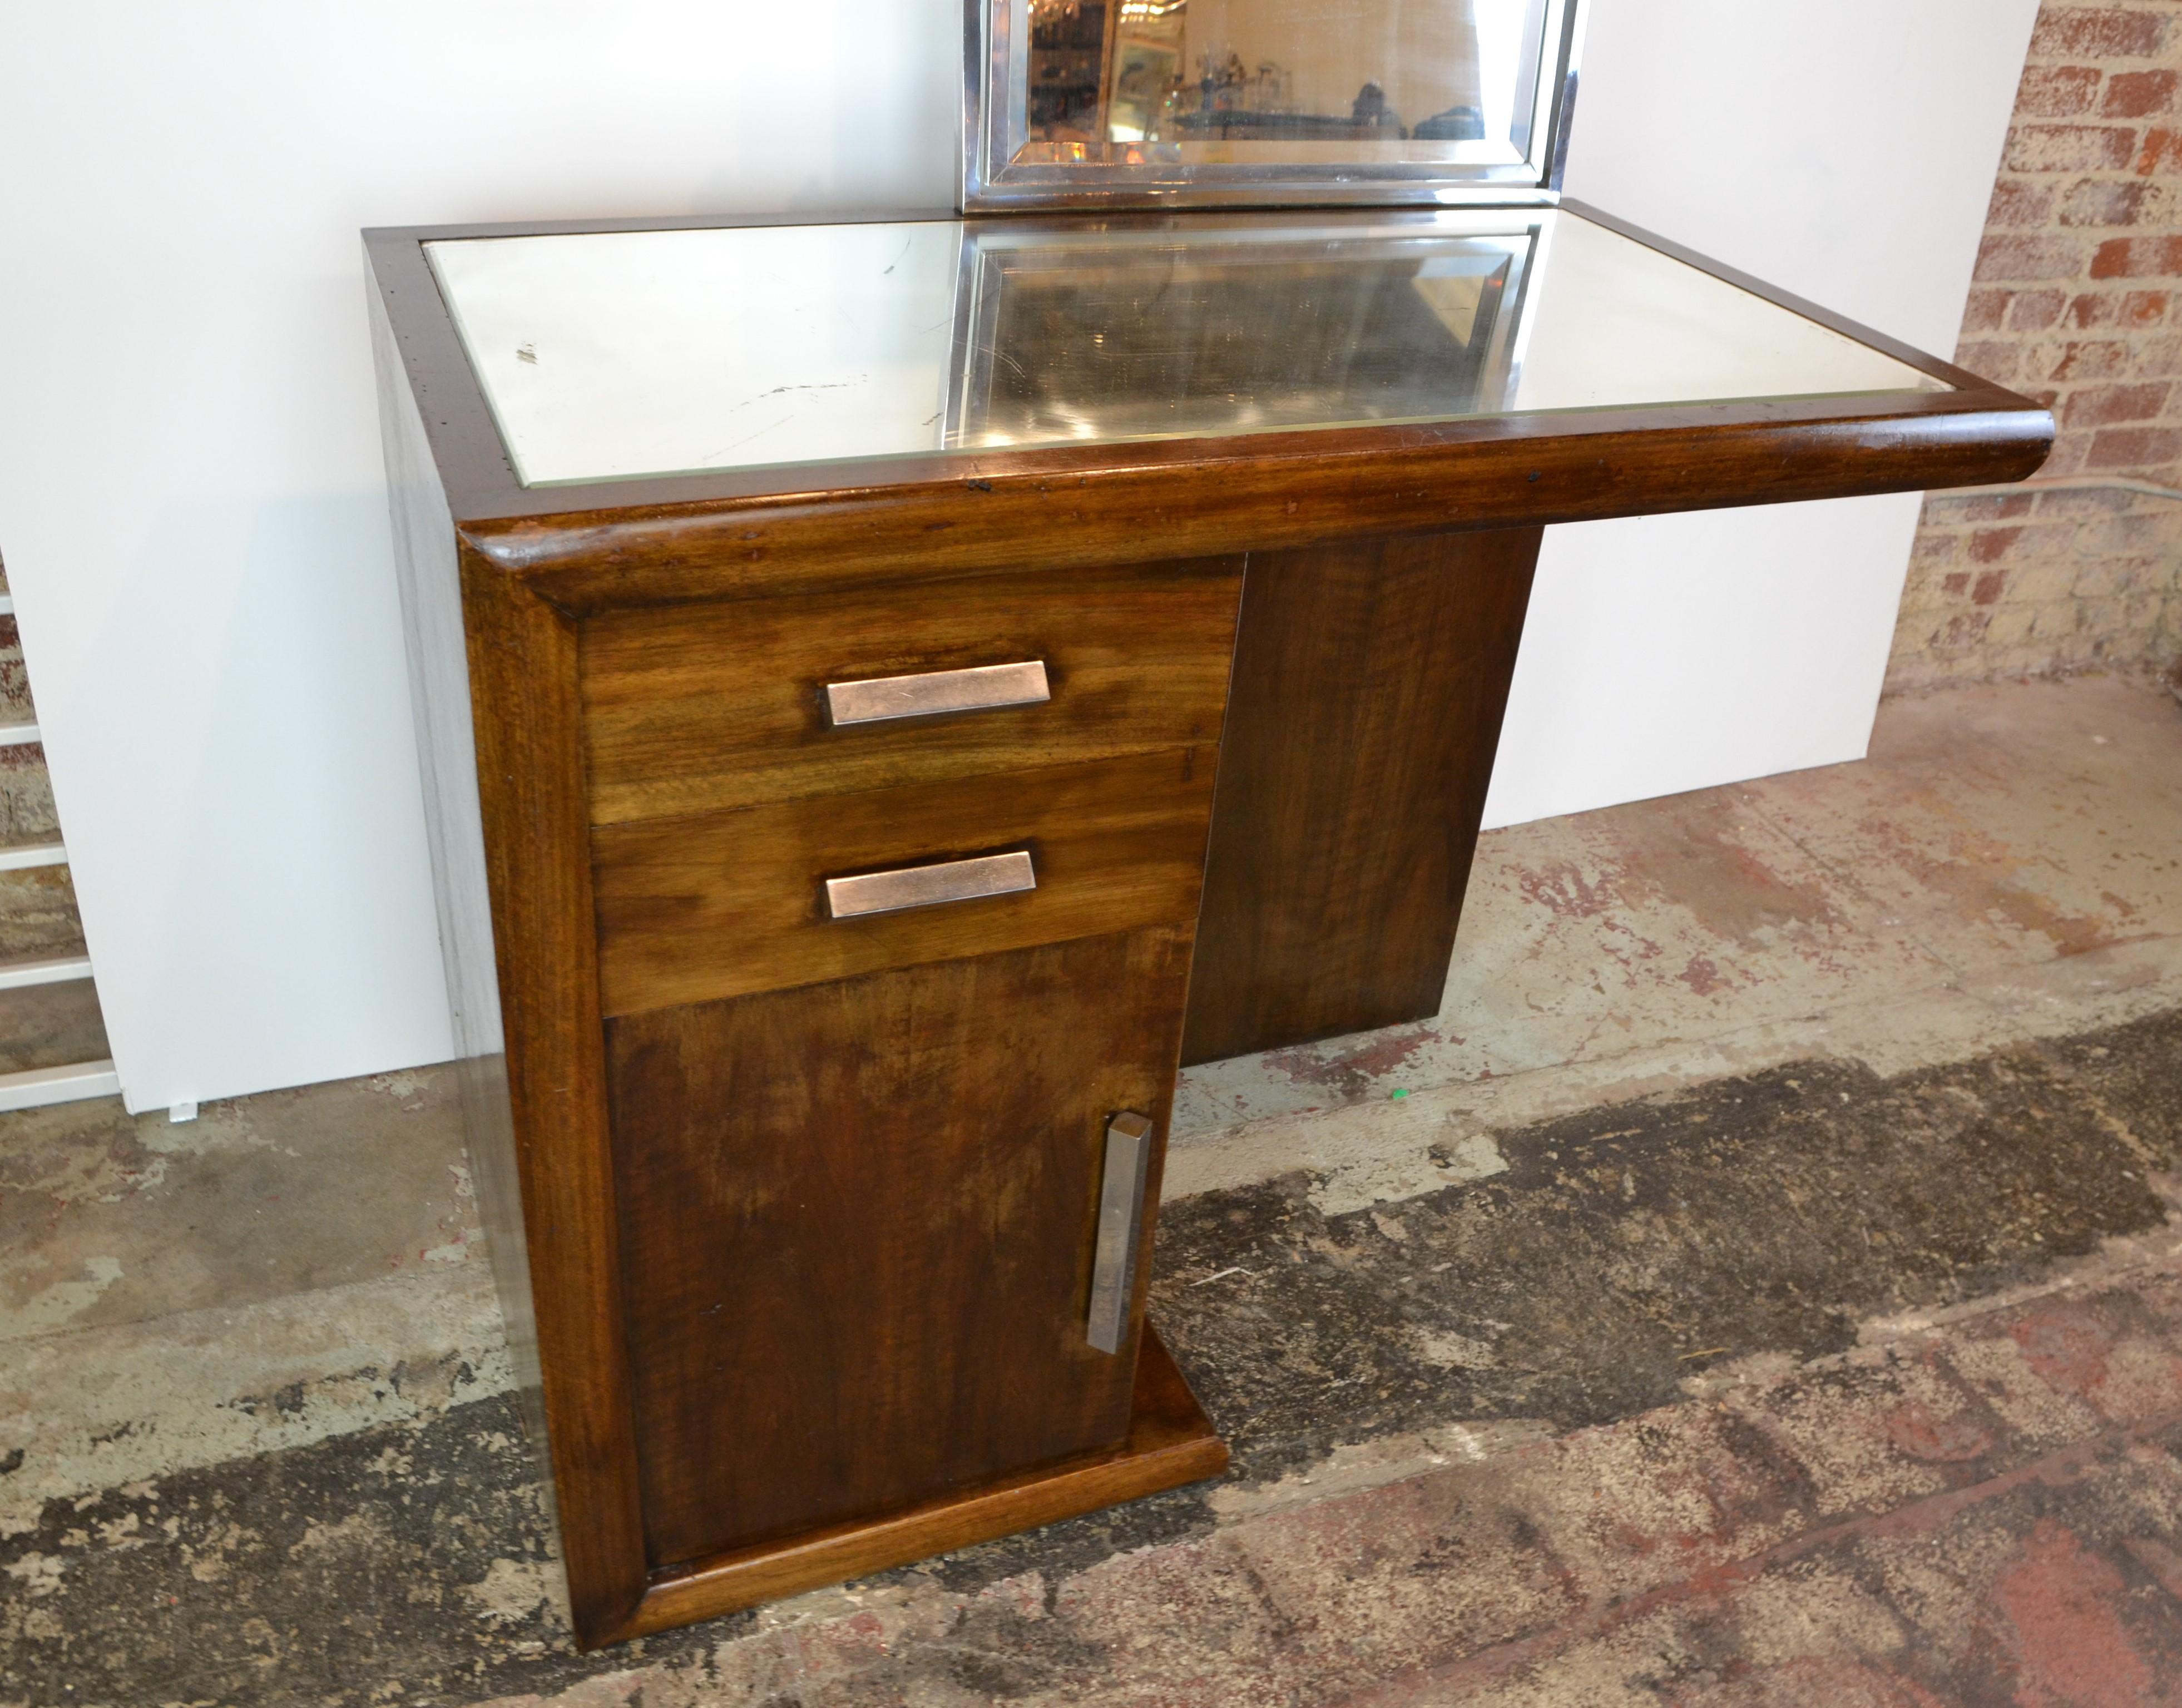 A genuine Art Deco vanity / dressing table in mahogany. Chrome hardware and mirror surround. Inset mirror top. Features one cupboard and 2 drawers. circa 1935. The desk with out the mirror is 34.75